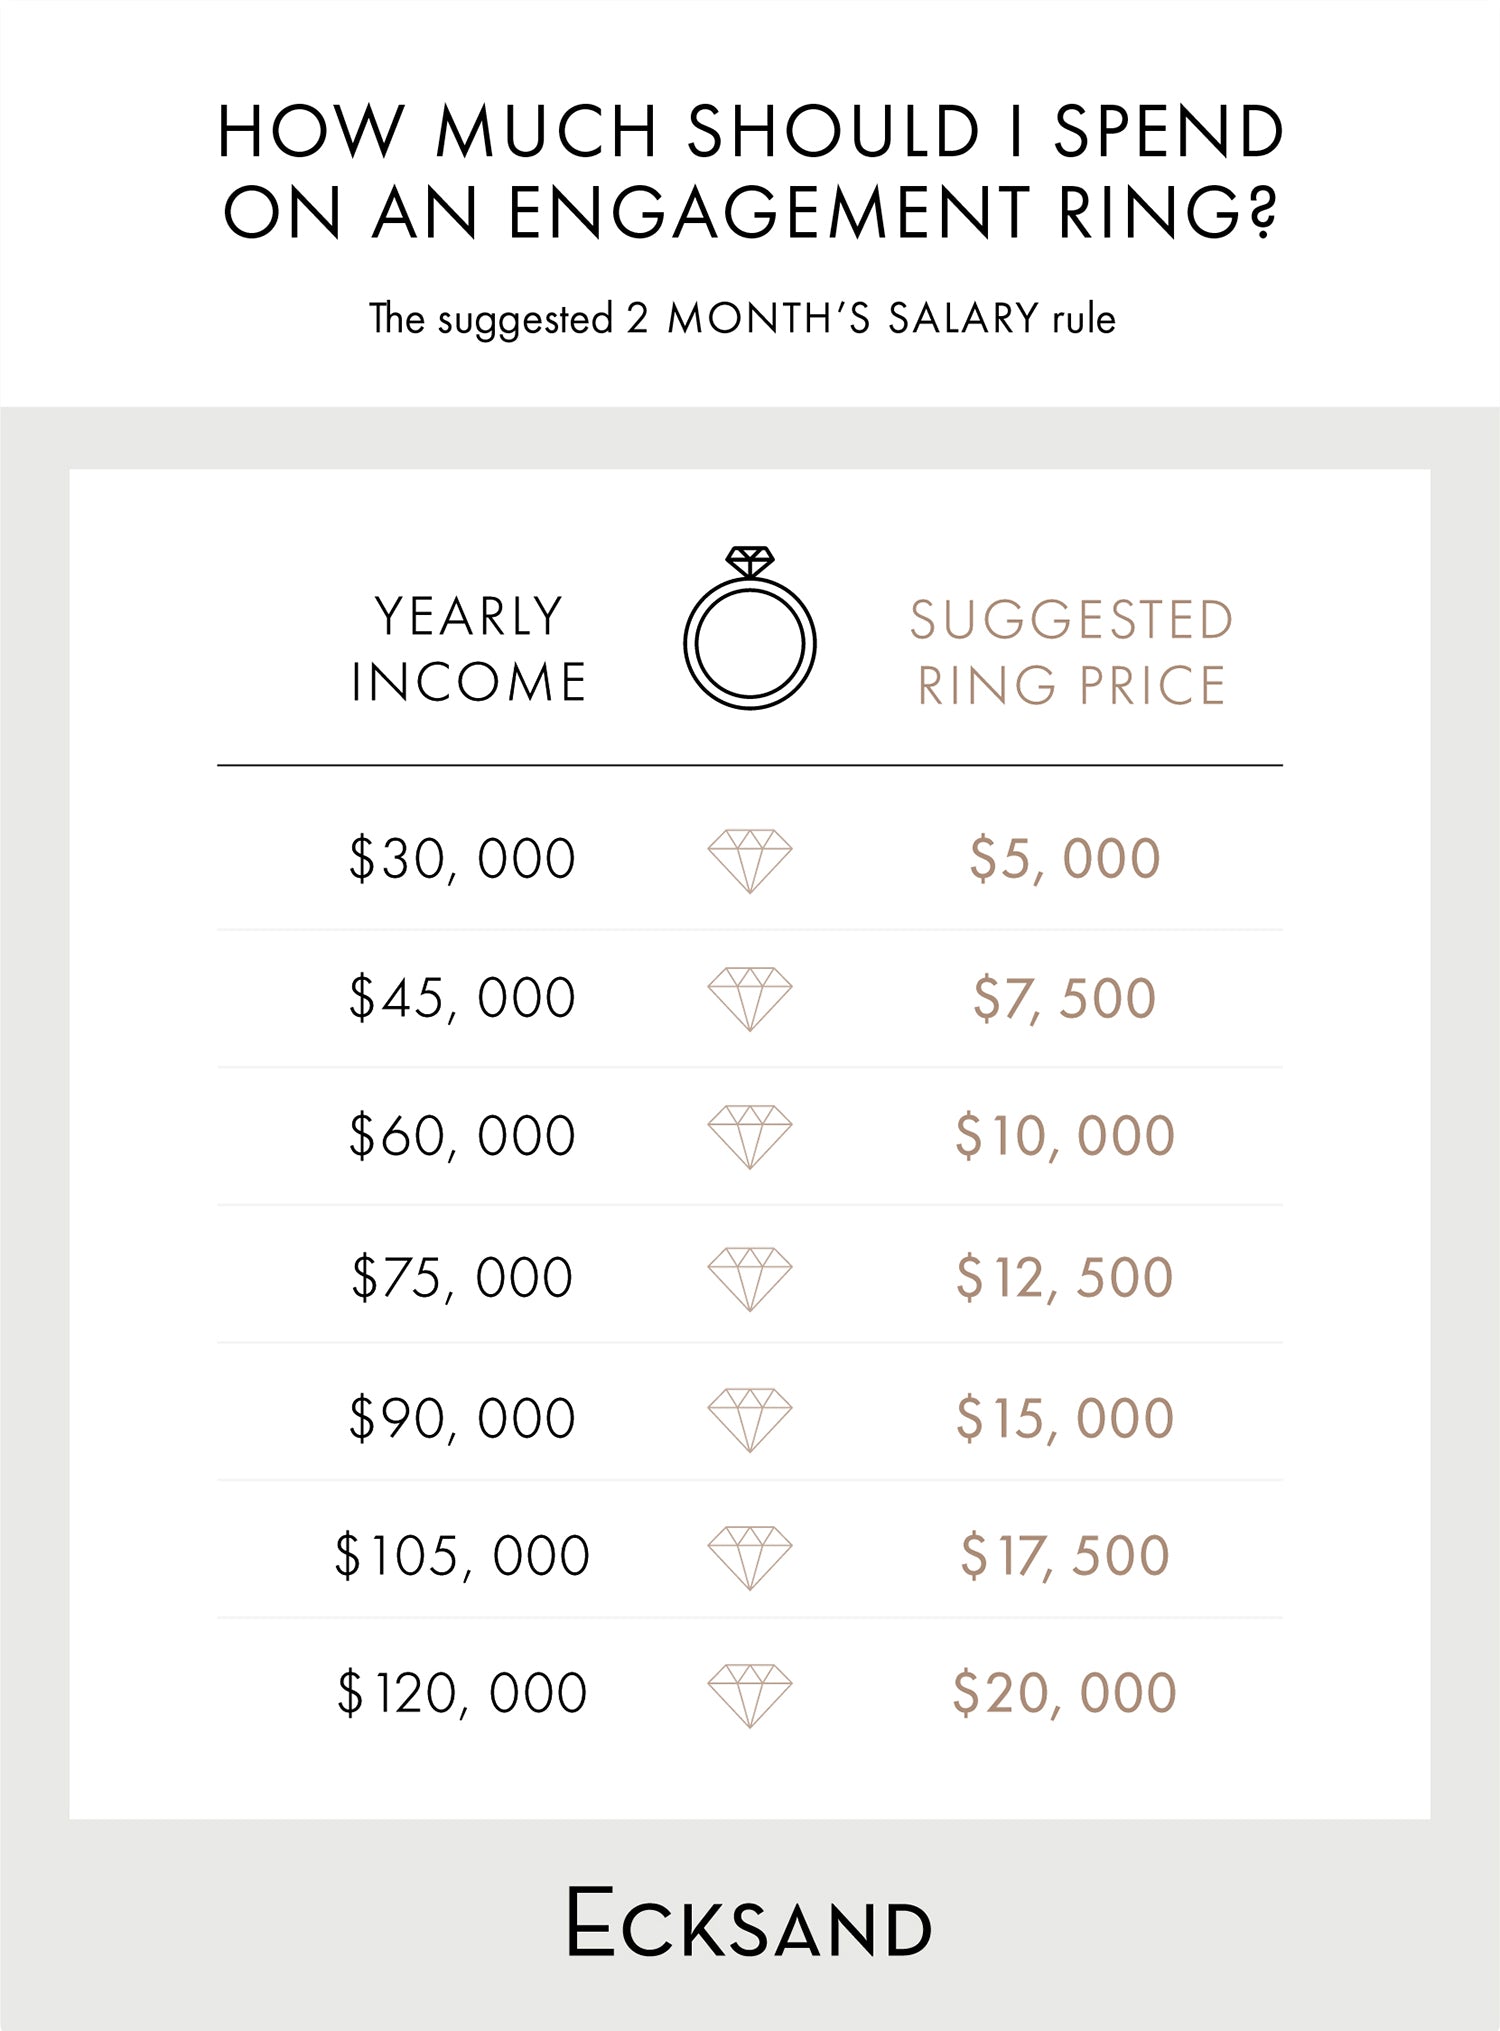 Text about how much to spend on an Ecksand engagment ring